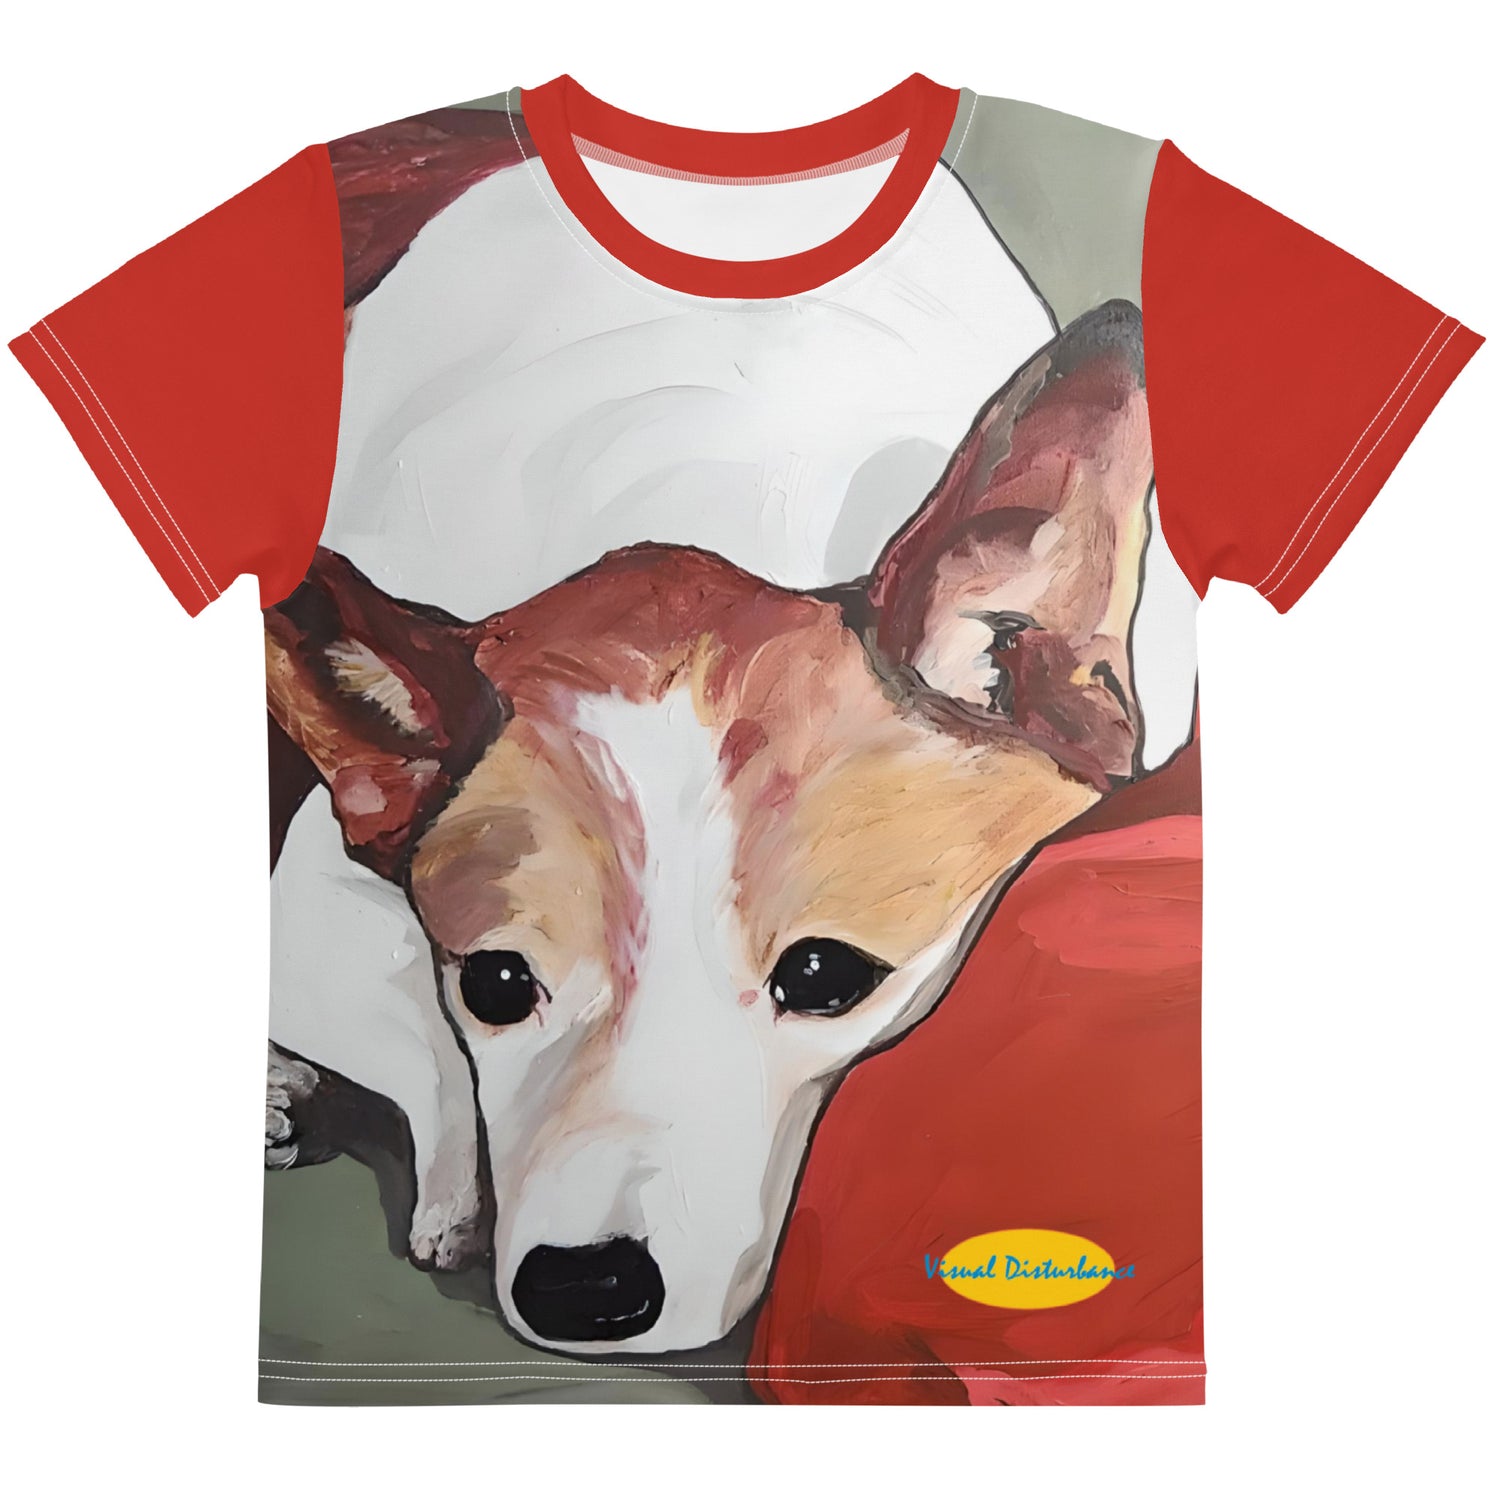 A t-shirt with a brown and white dog laying on a red pillow.